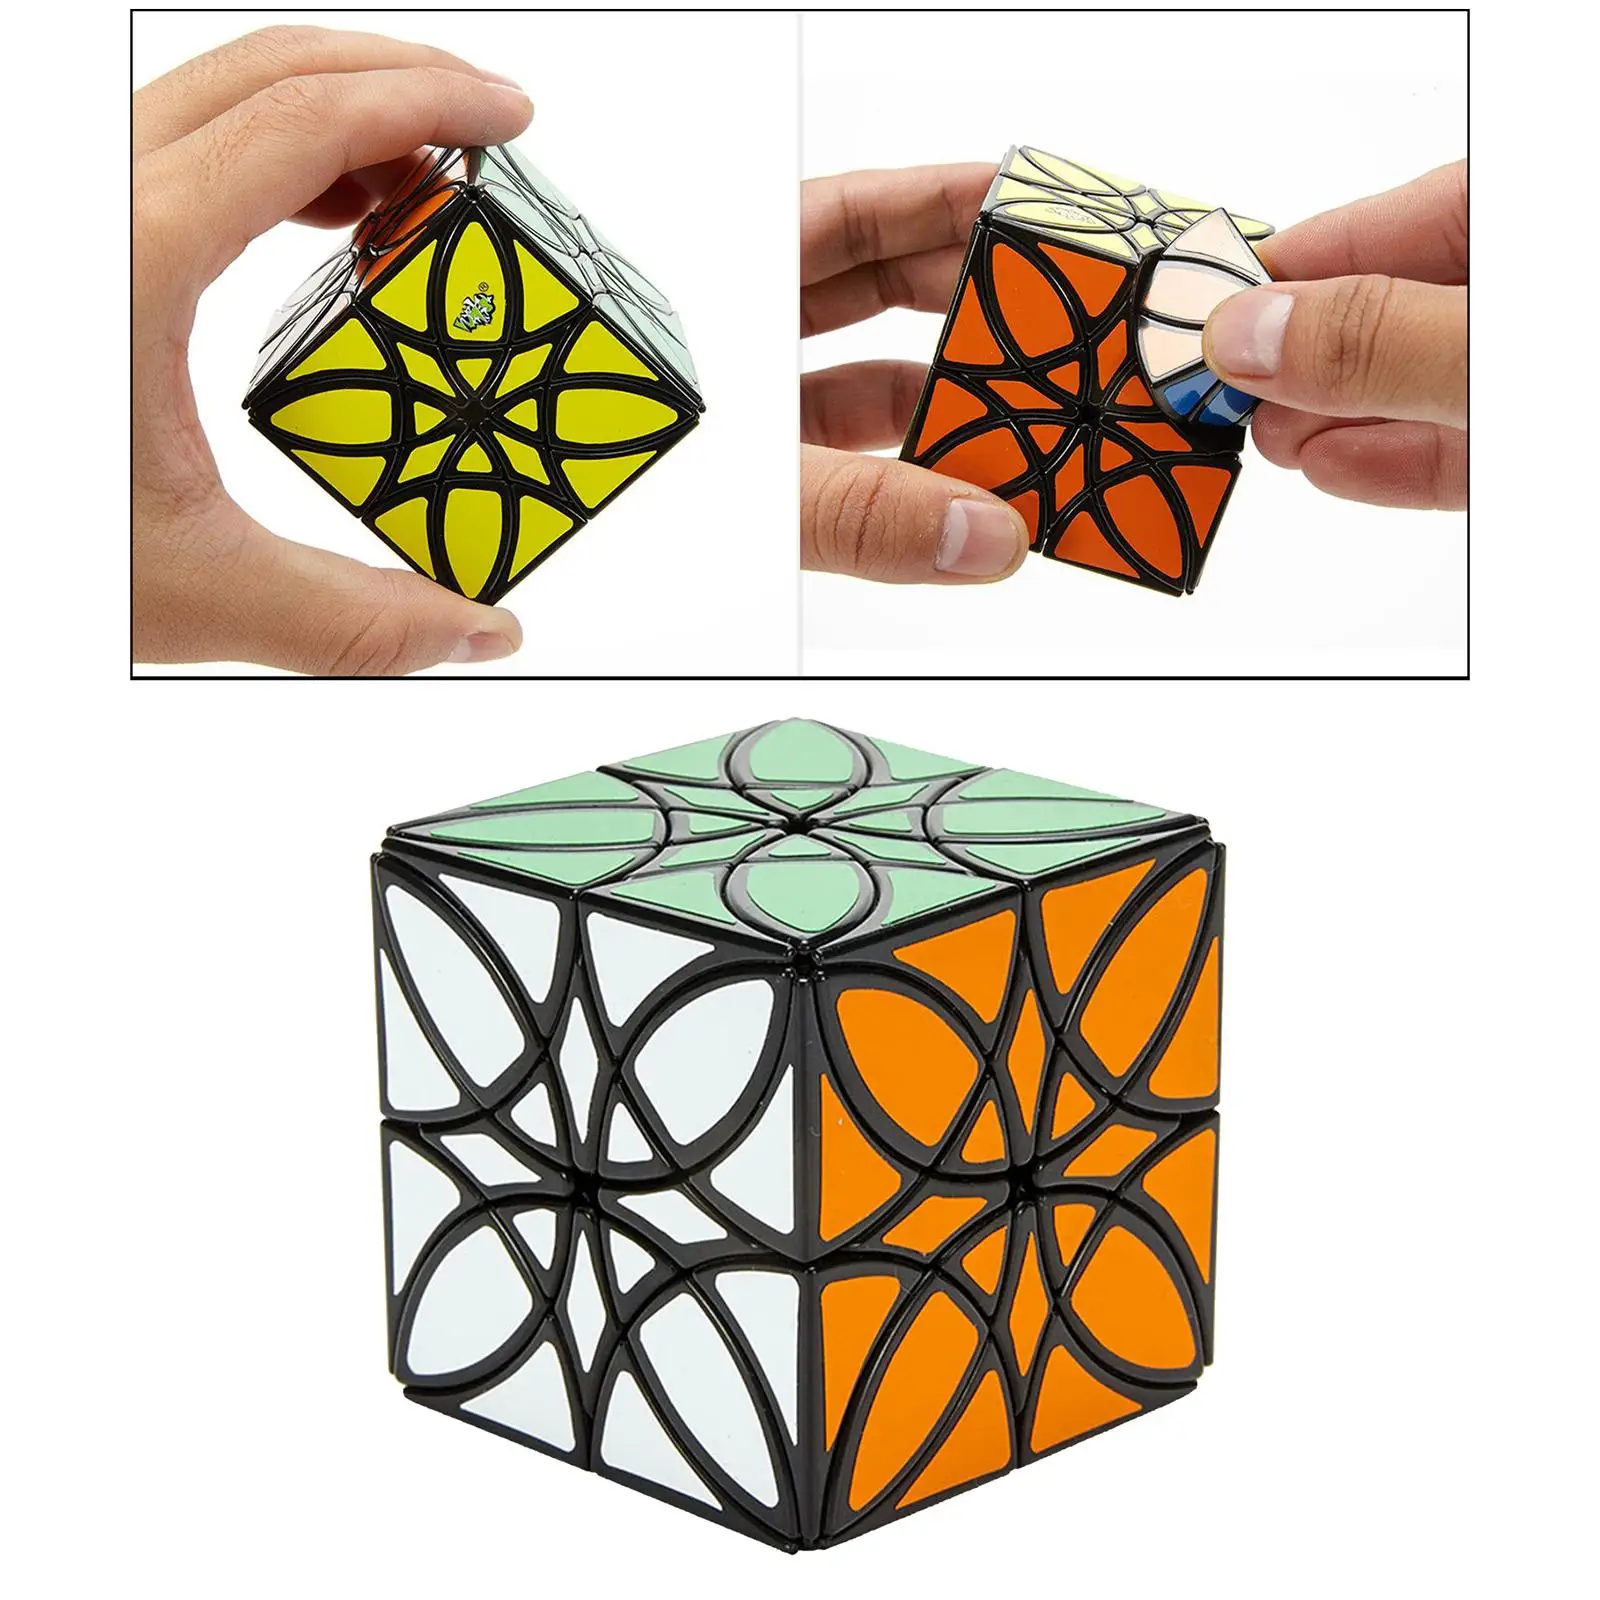 Smooth 4 Corner   Twist Puzzle Easy Turning Multicolor Toys  Adults Children   Halloween New Year Gifts